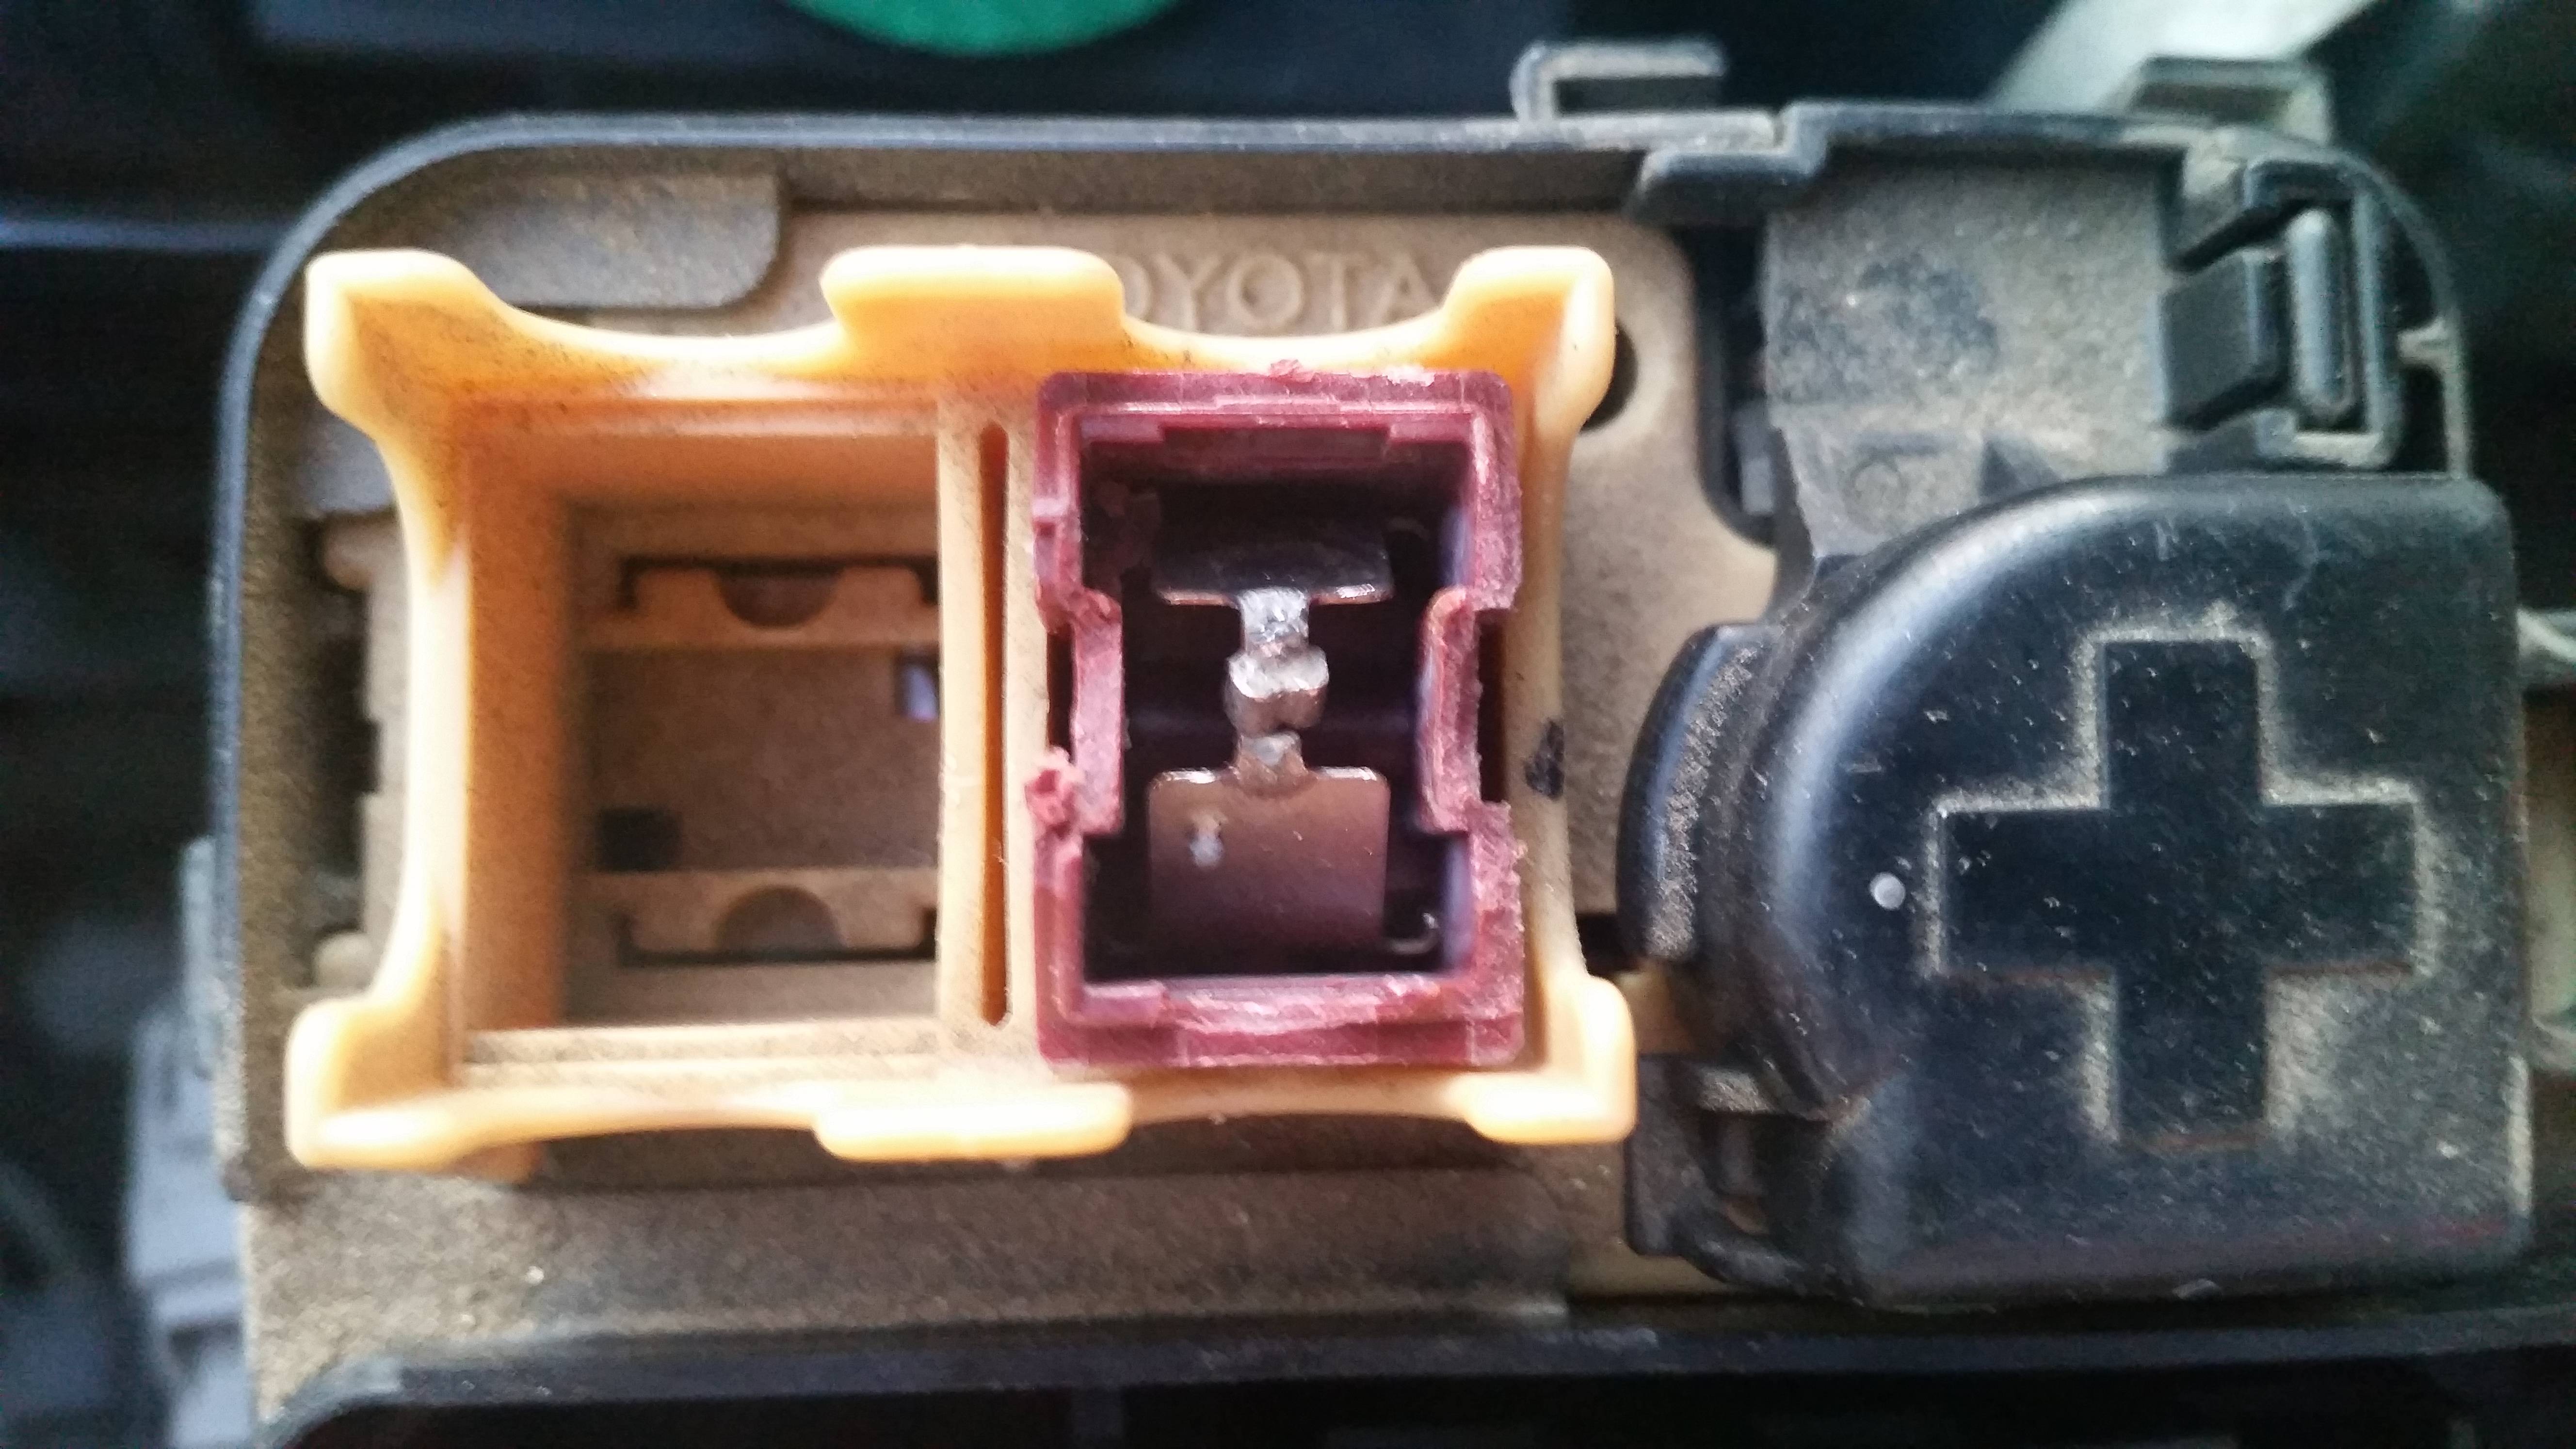 Battery reversed--which fuse blew ...